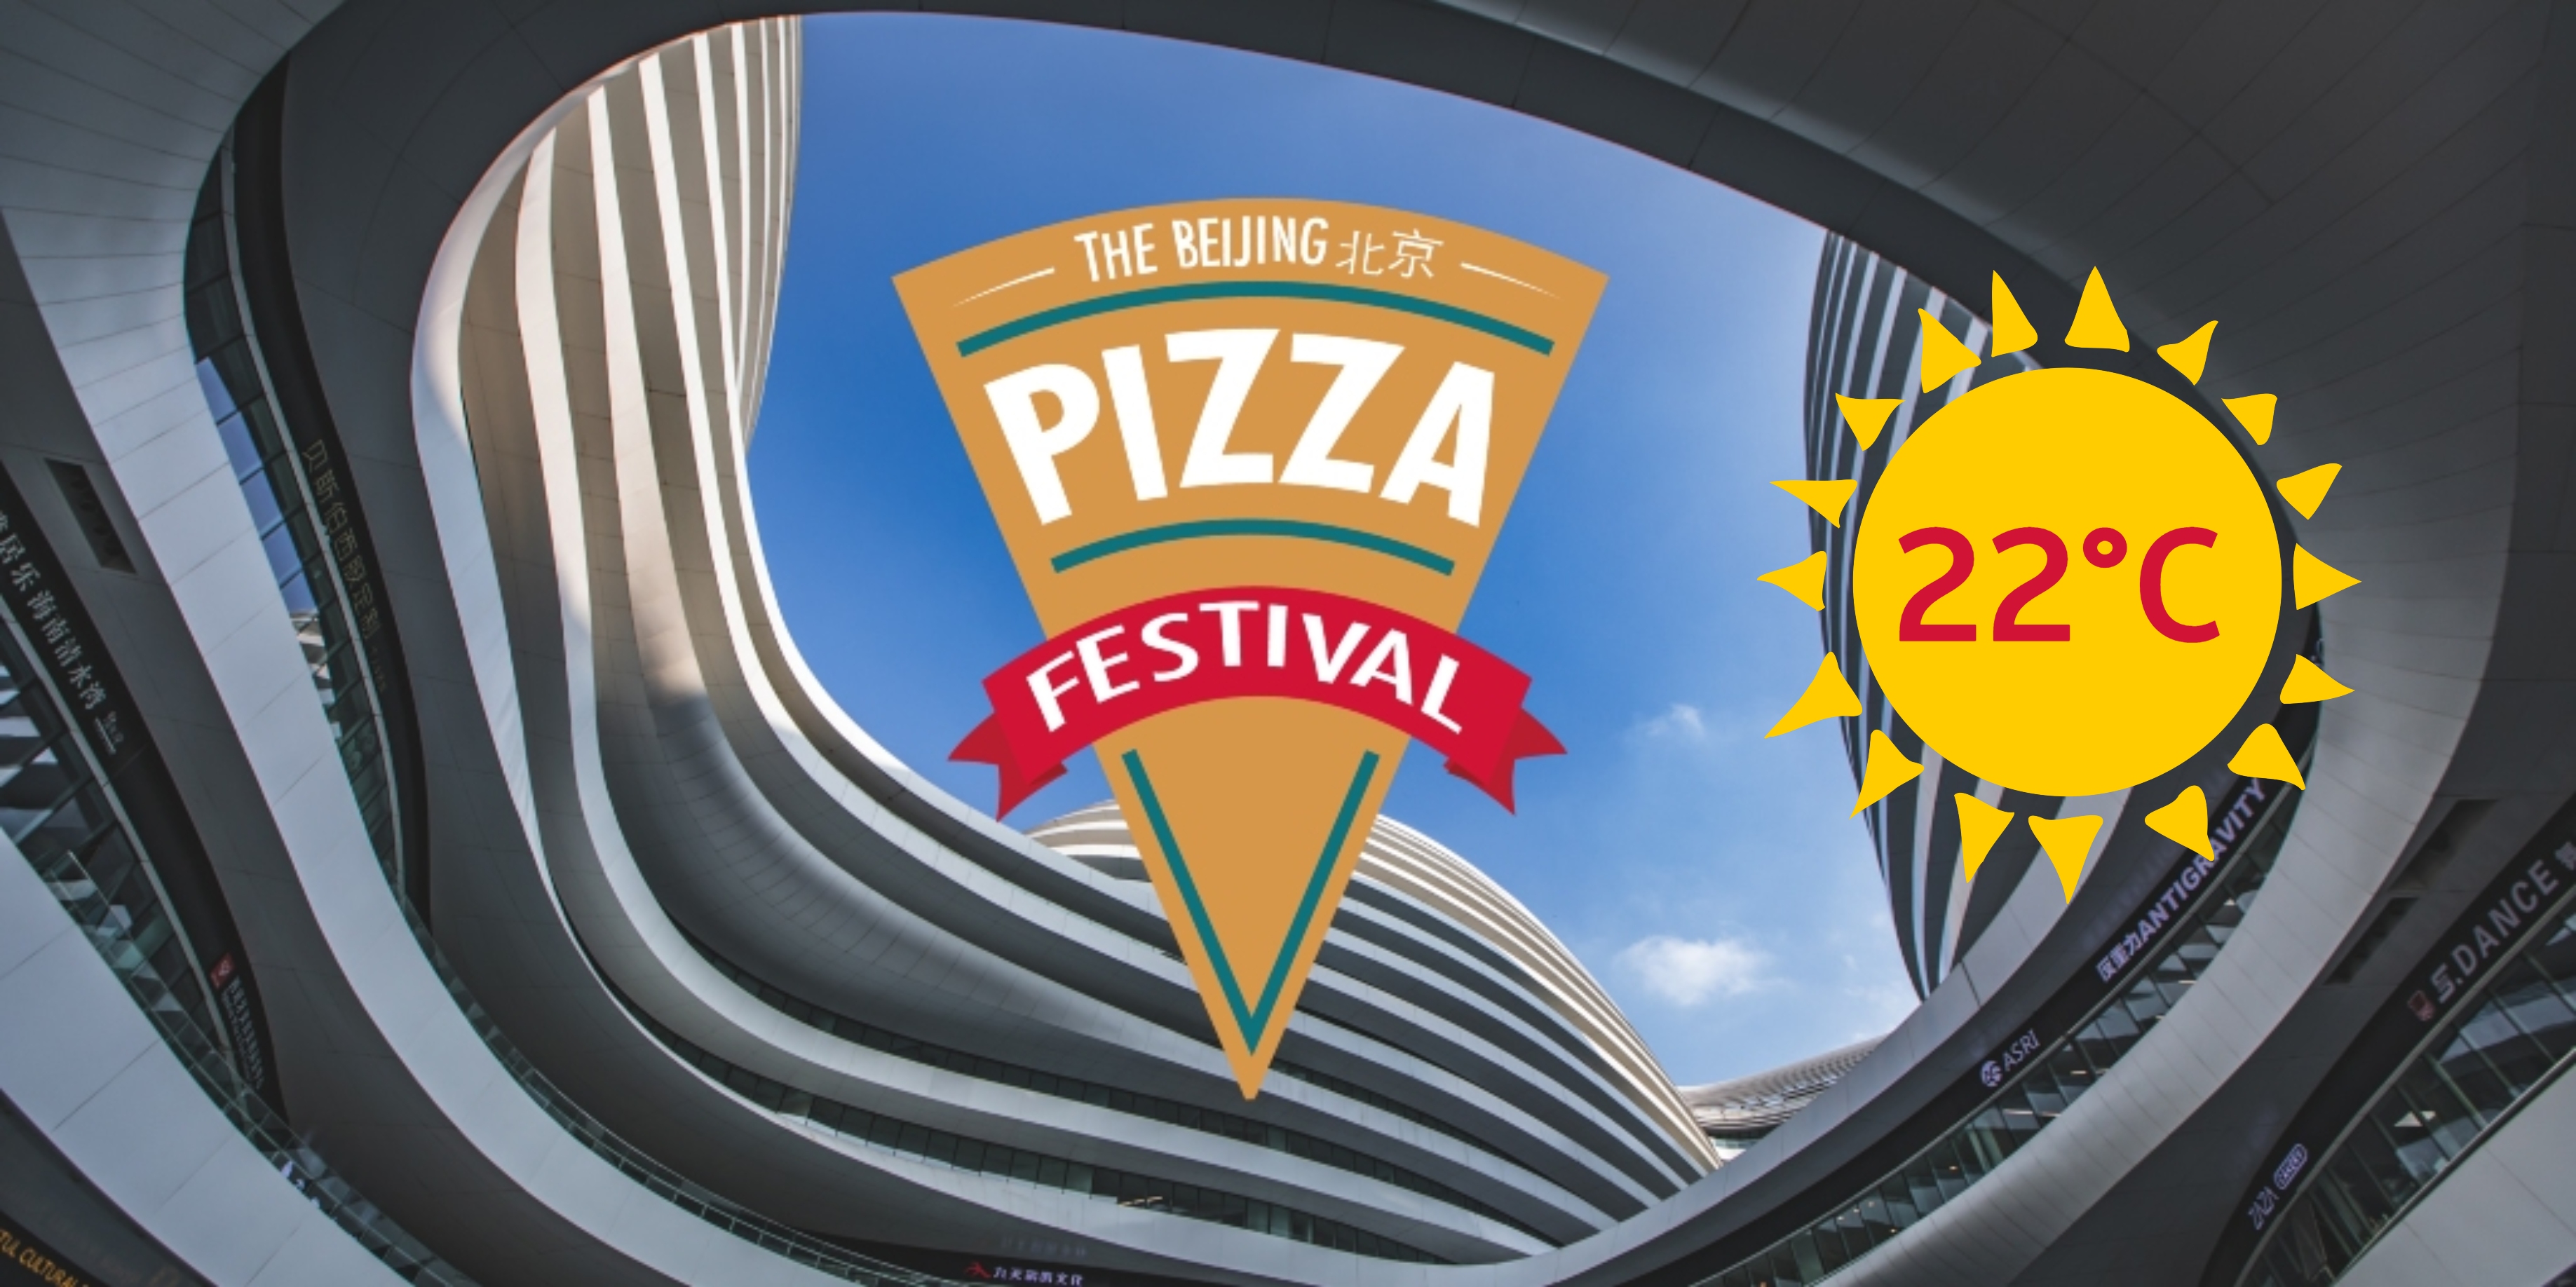 Warm Weather and Blue Skies Await: How to Get to Galaxy Soho and This Weekend&#039;s Pizza Fest